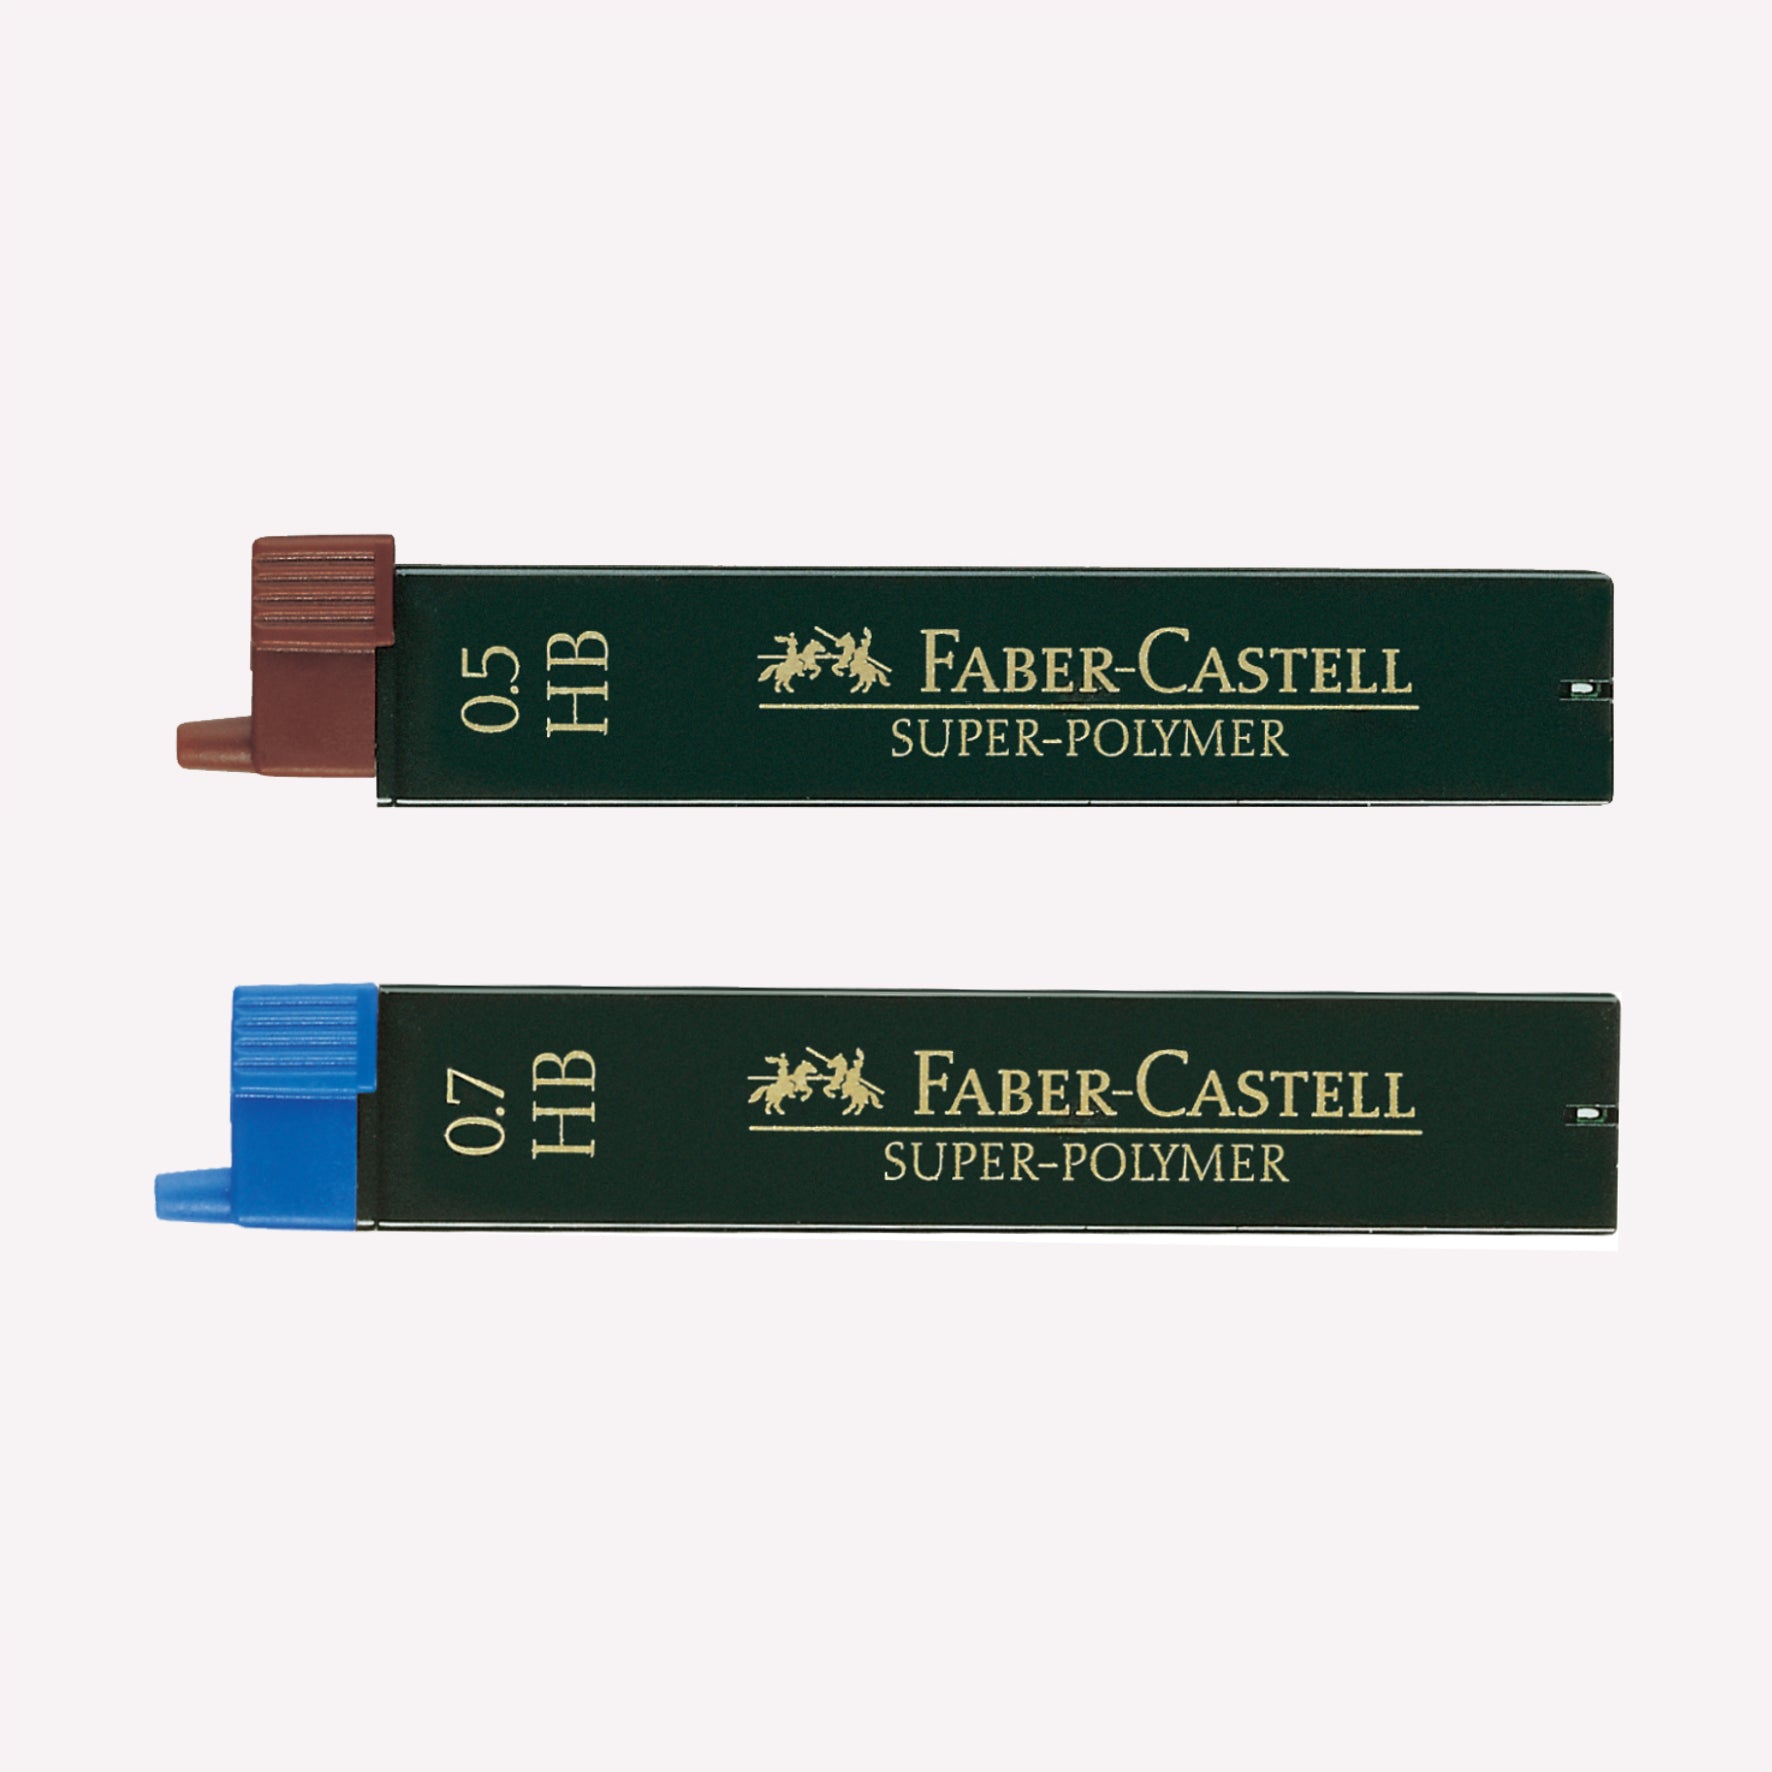 Faber Castell pack of 12 Super Polymer Leads in a green package with coloured lids indicating the line width. Available in sizes 0.5mm and 0.7mm. 